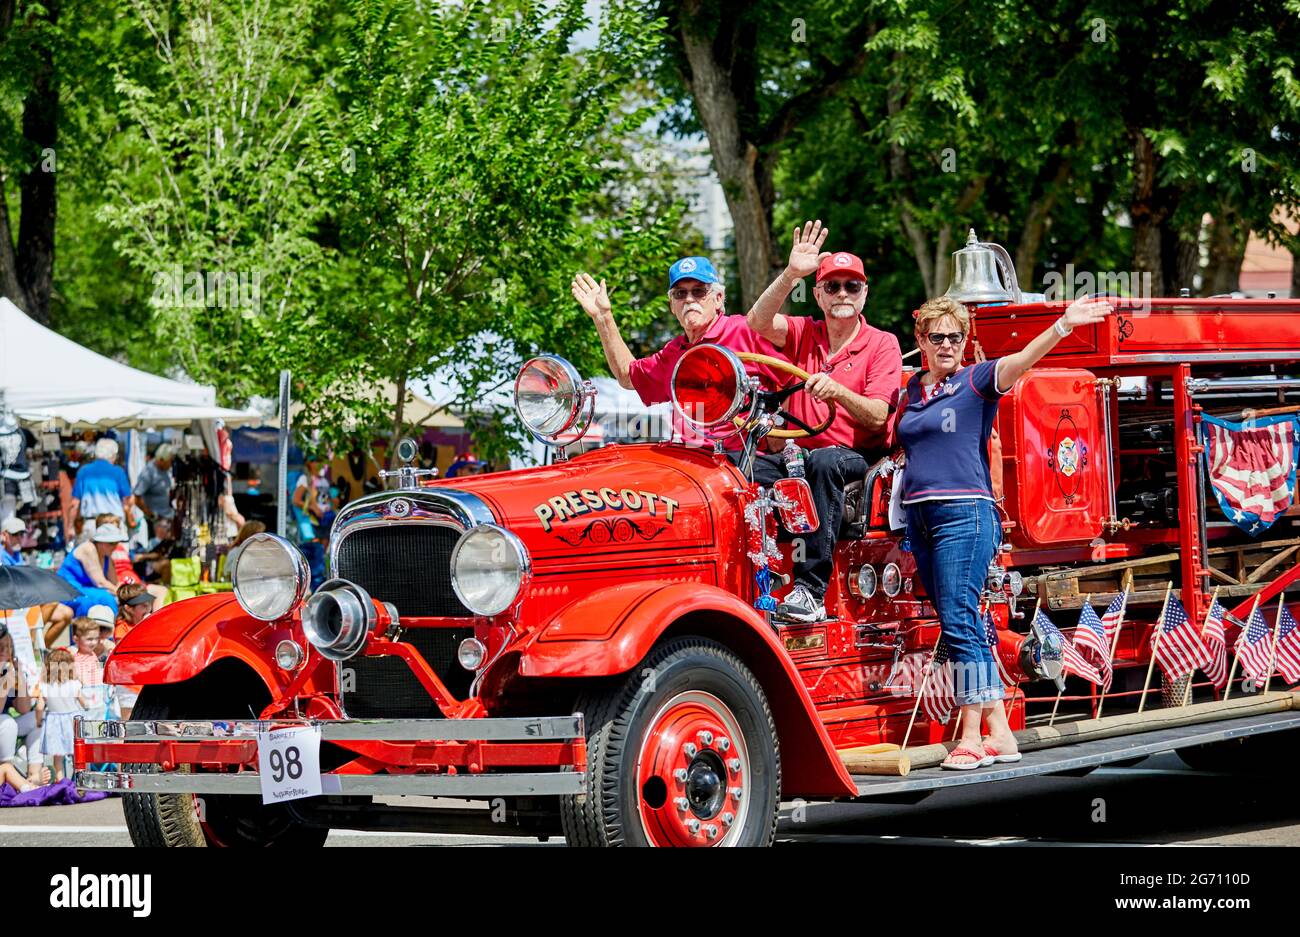 Prescott, Arizona, USA - July 3, 2021: Participants riding on an antique fire truck waving to the spectators in the 4th of July parade Stock Photo